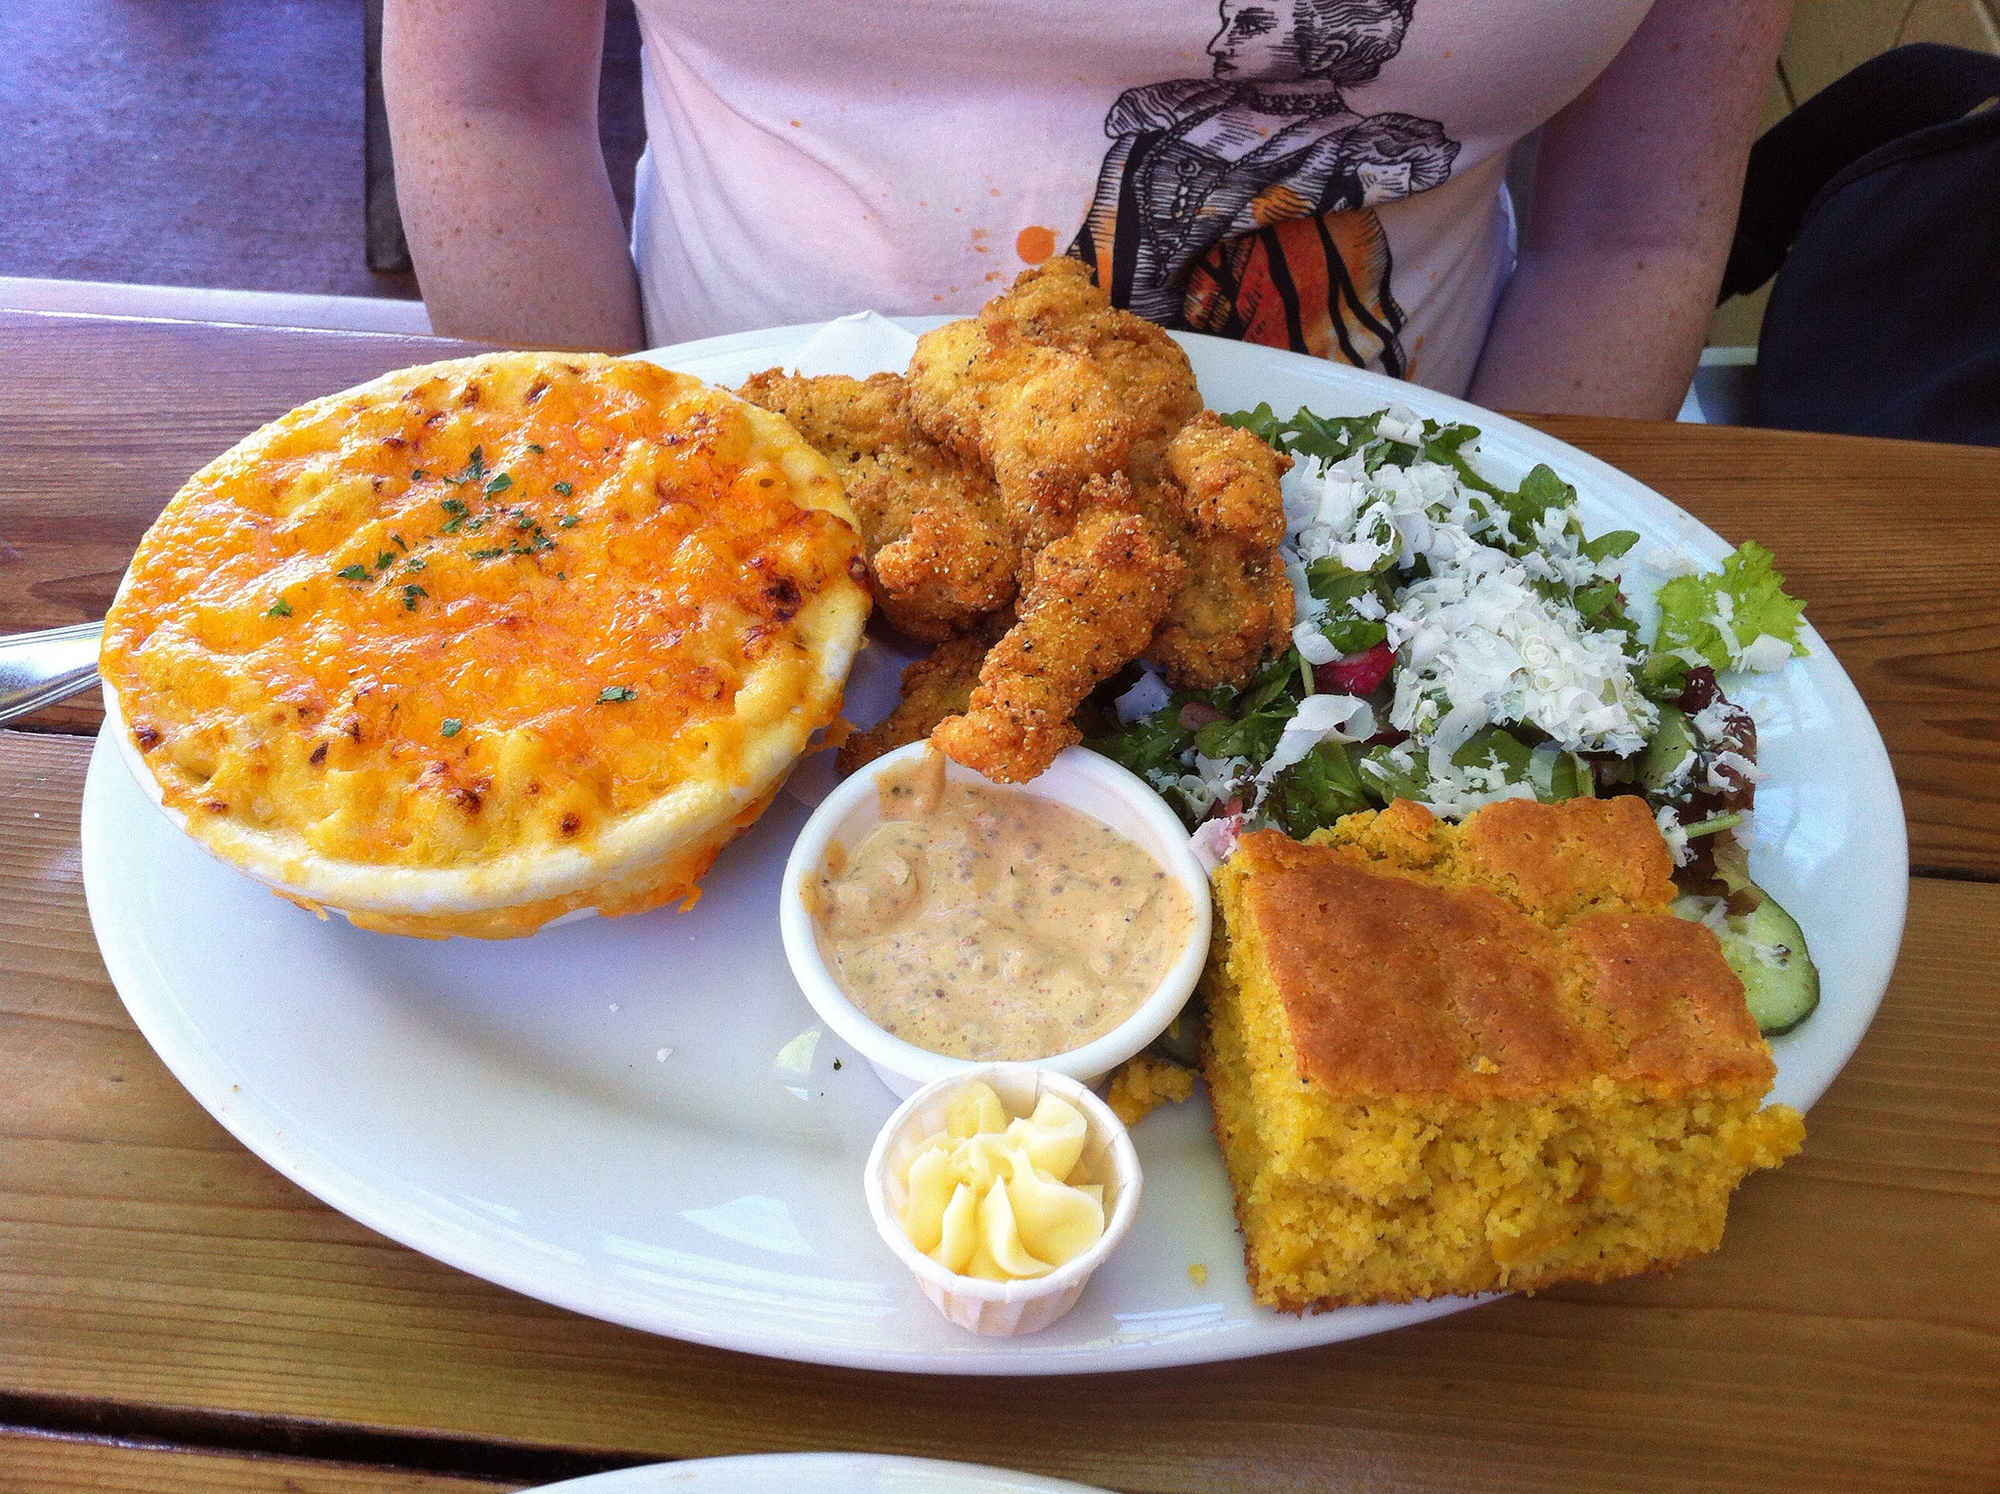 This Oregon Mac ‘n’ Cheese Restaurant Makes Top 10 in Country